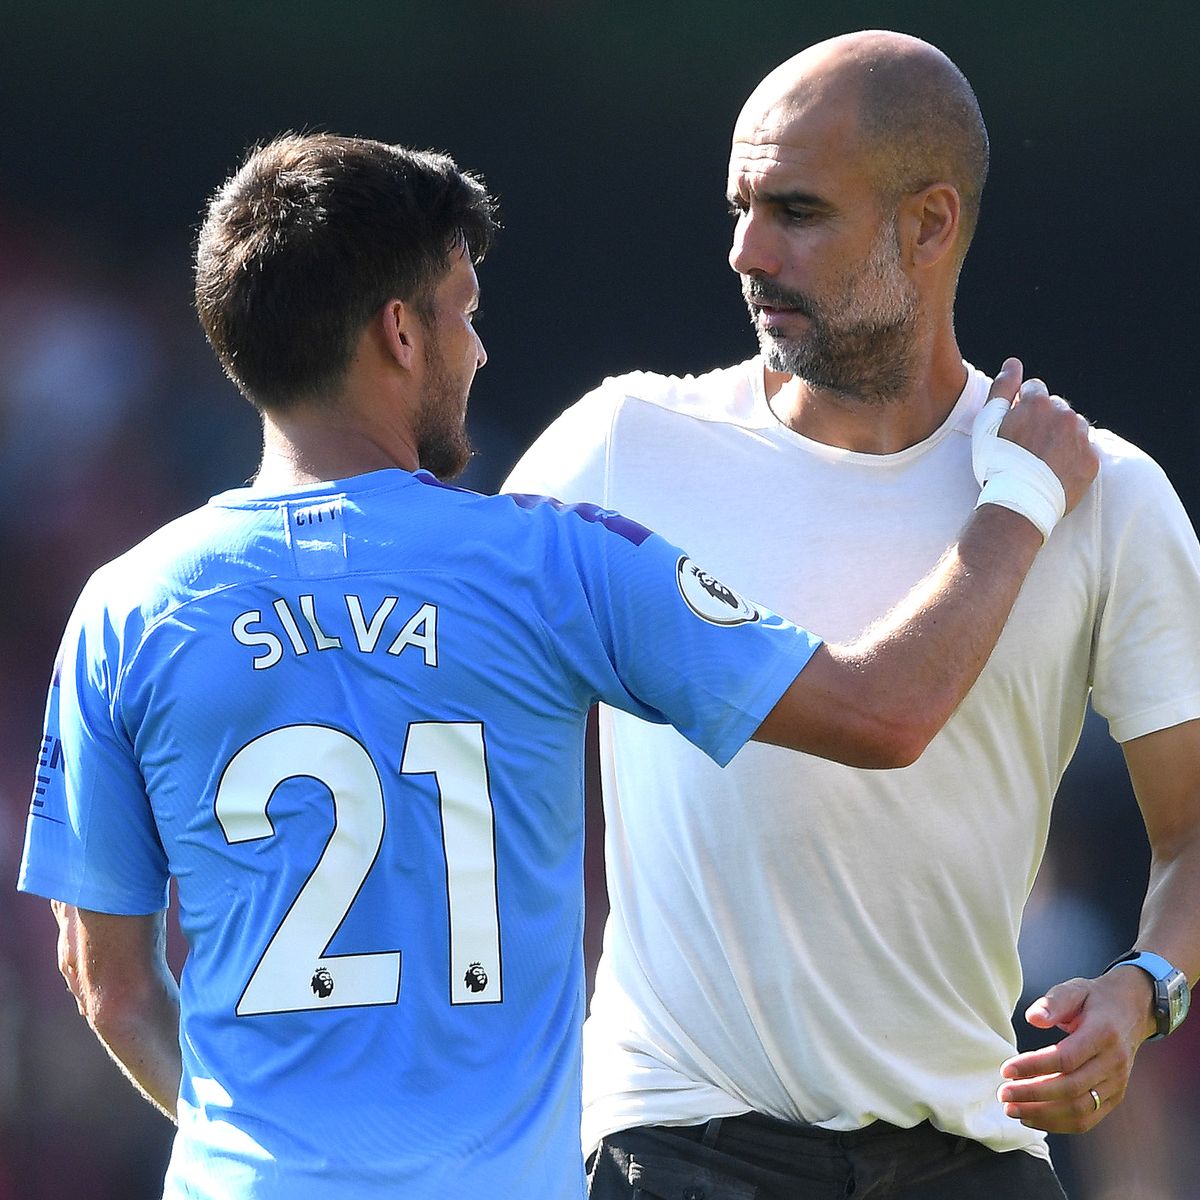 “I had been told really good things about him and he has lived up to them. He’s the best manager I have ever had. He’s really hard driven. He pushes everybody. But if you want to get to the very highest level, it’s good for you.” - David Silva